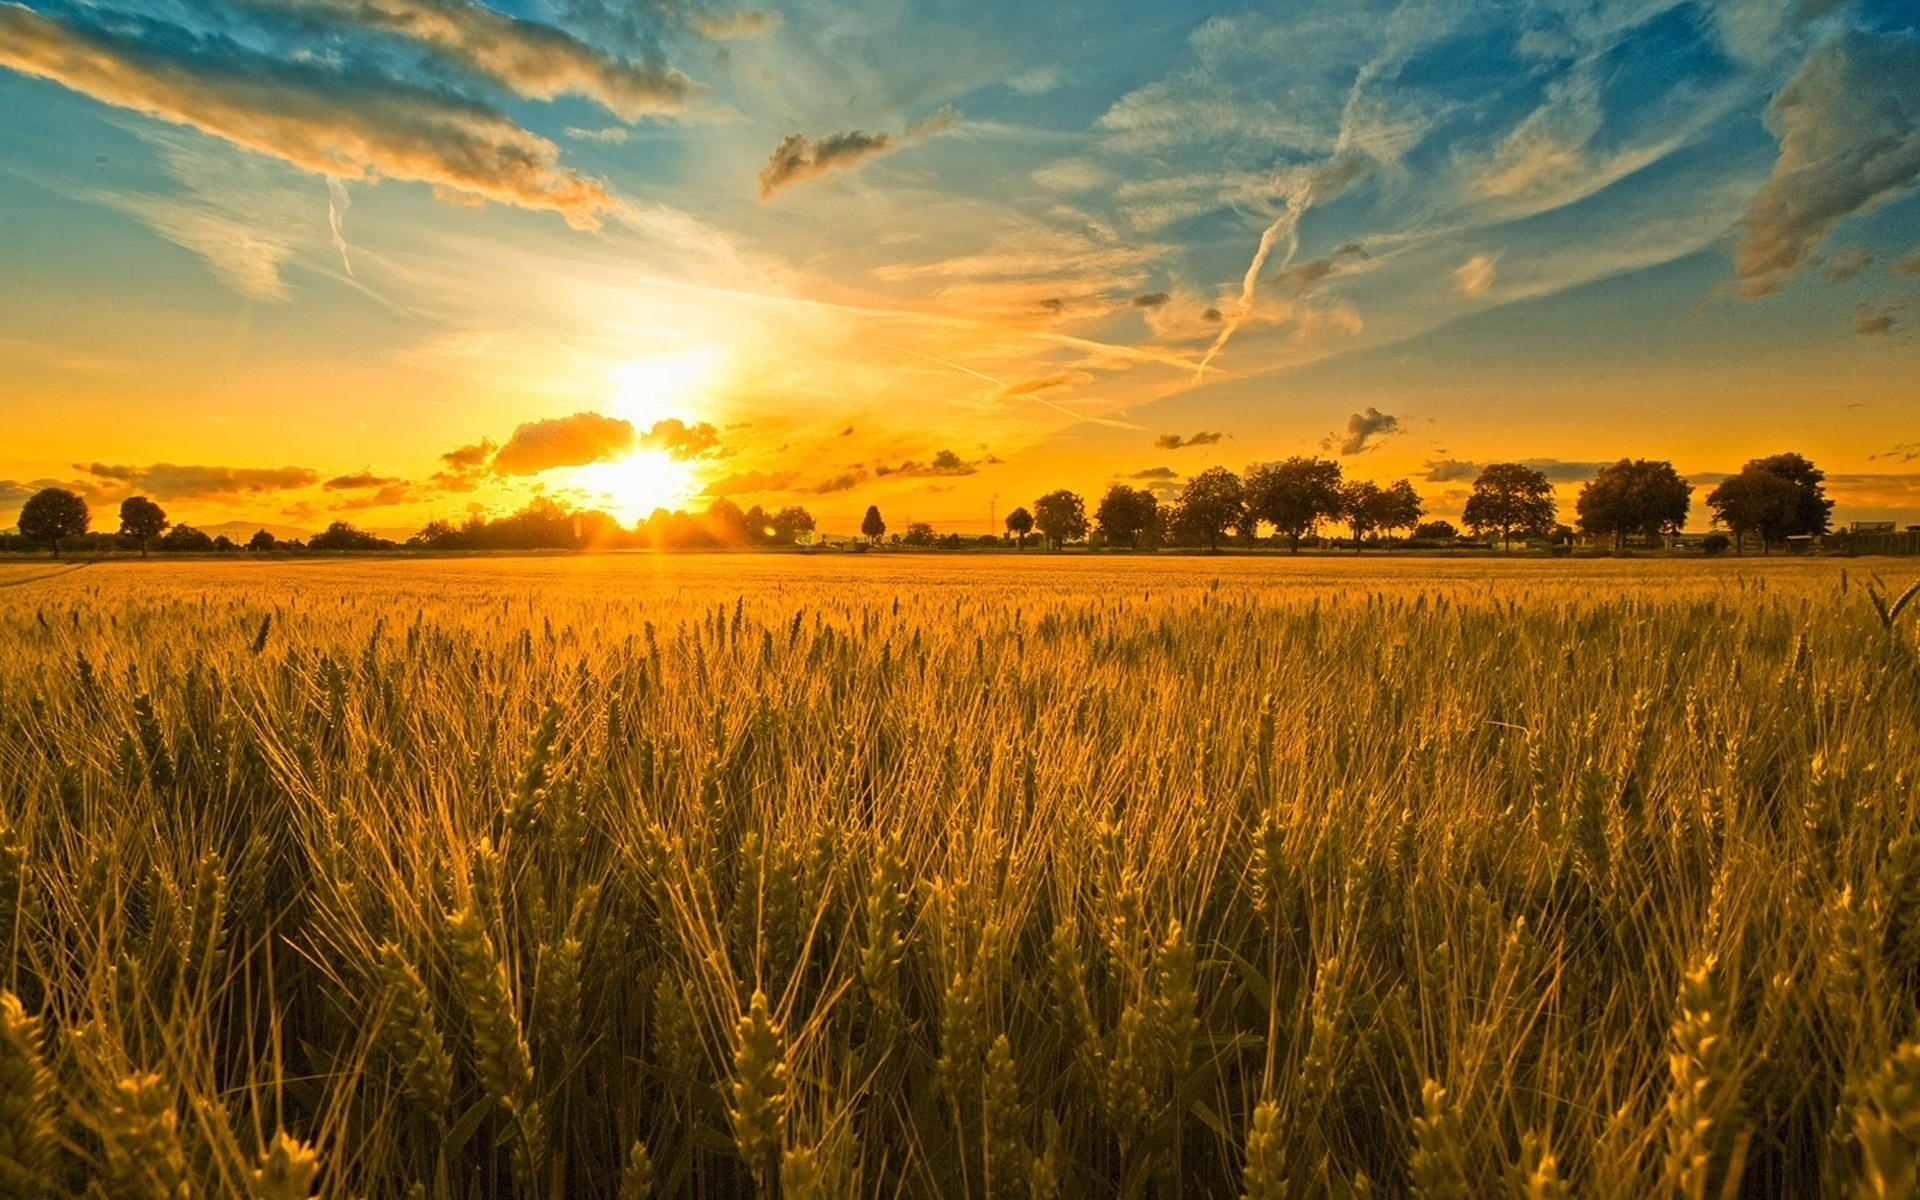 Farm: Land used for agriculture production, Wheat head. 1920x1200 HD Wallpaper.